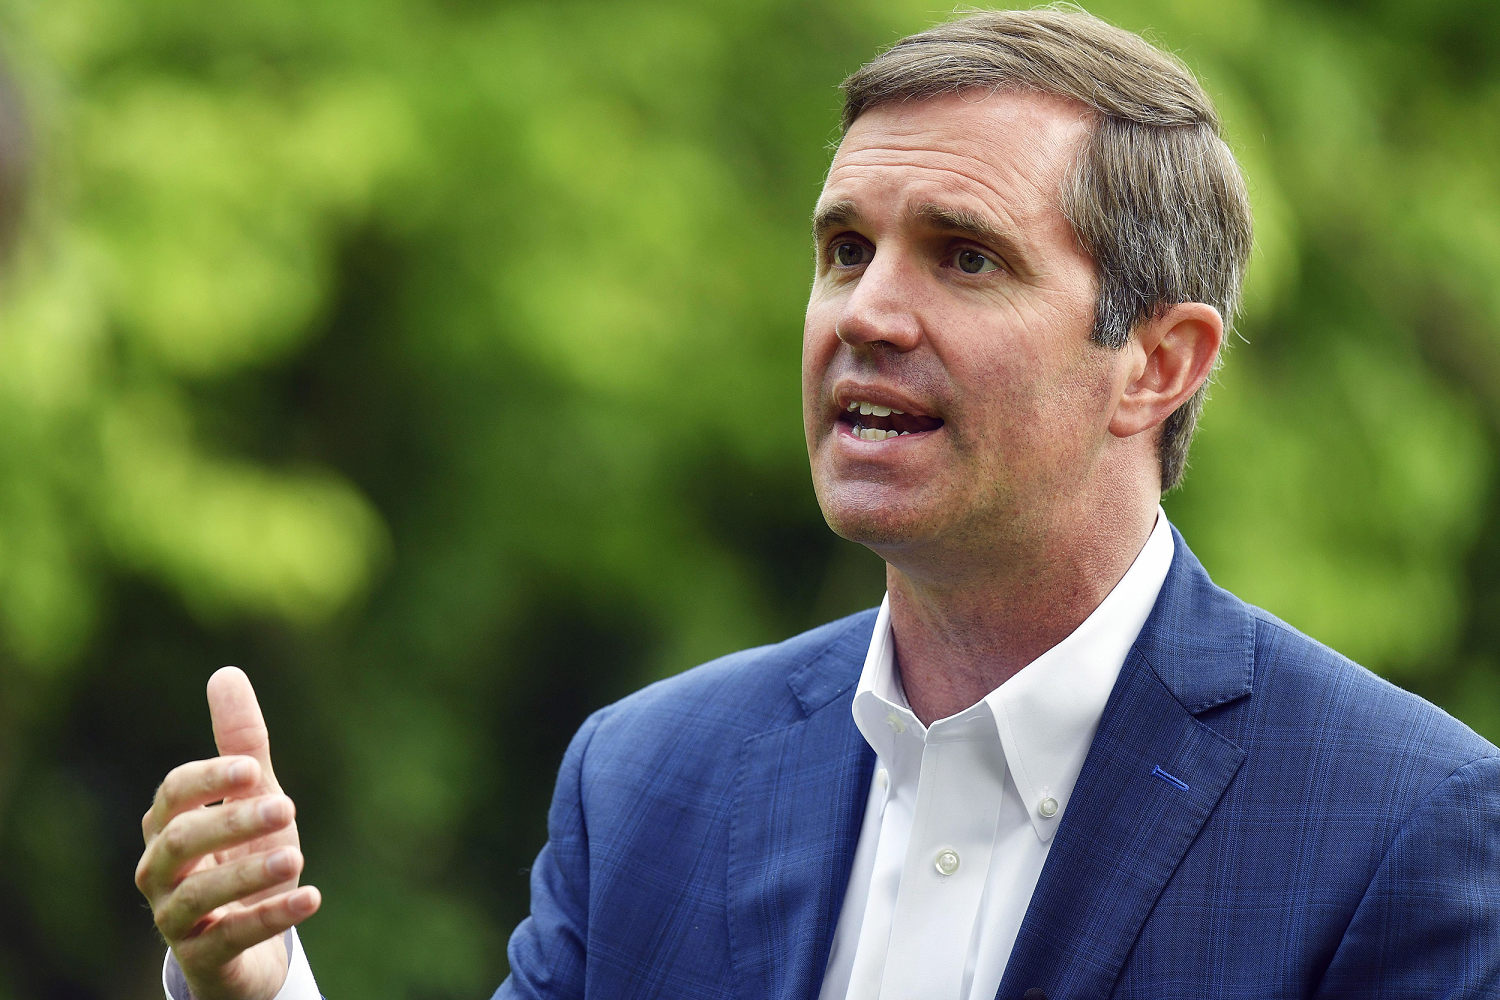 As a possible Harris VP pick, Kentucky Gov. Andy Beshear scrutinized for his abortion record